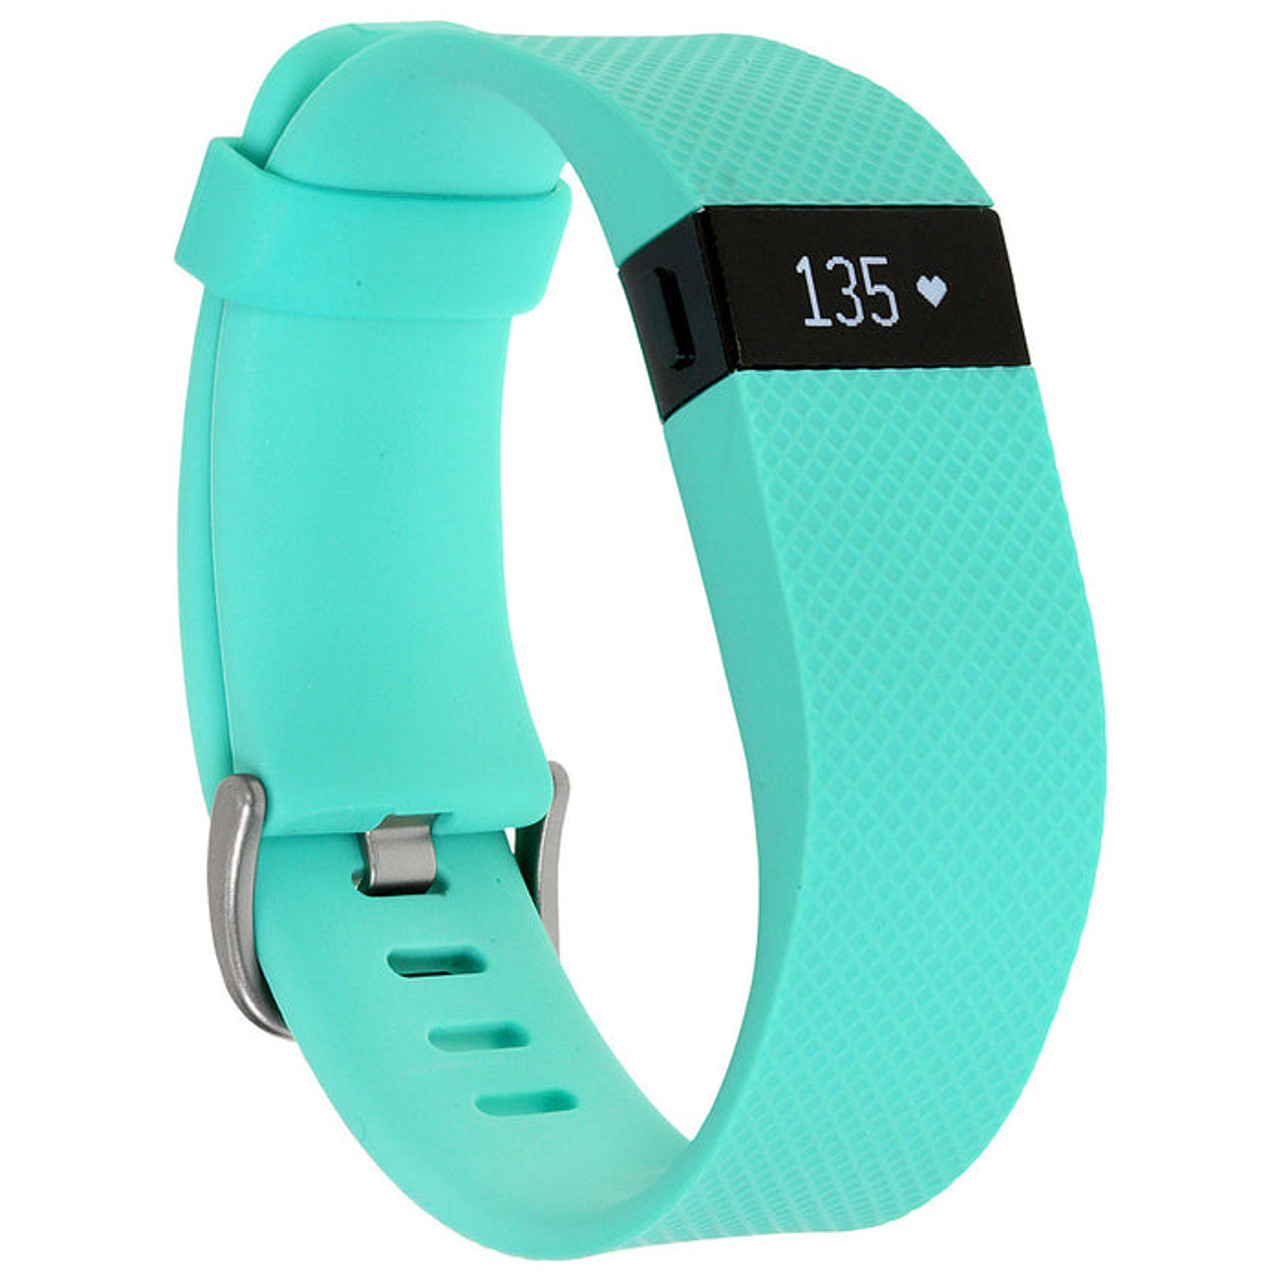 reservedele Fantasi frø Fitbit Charge HR Wireless Heart Rate & Activity Wristband (Teal, Large) -  Bargain Shop Outlet Limited